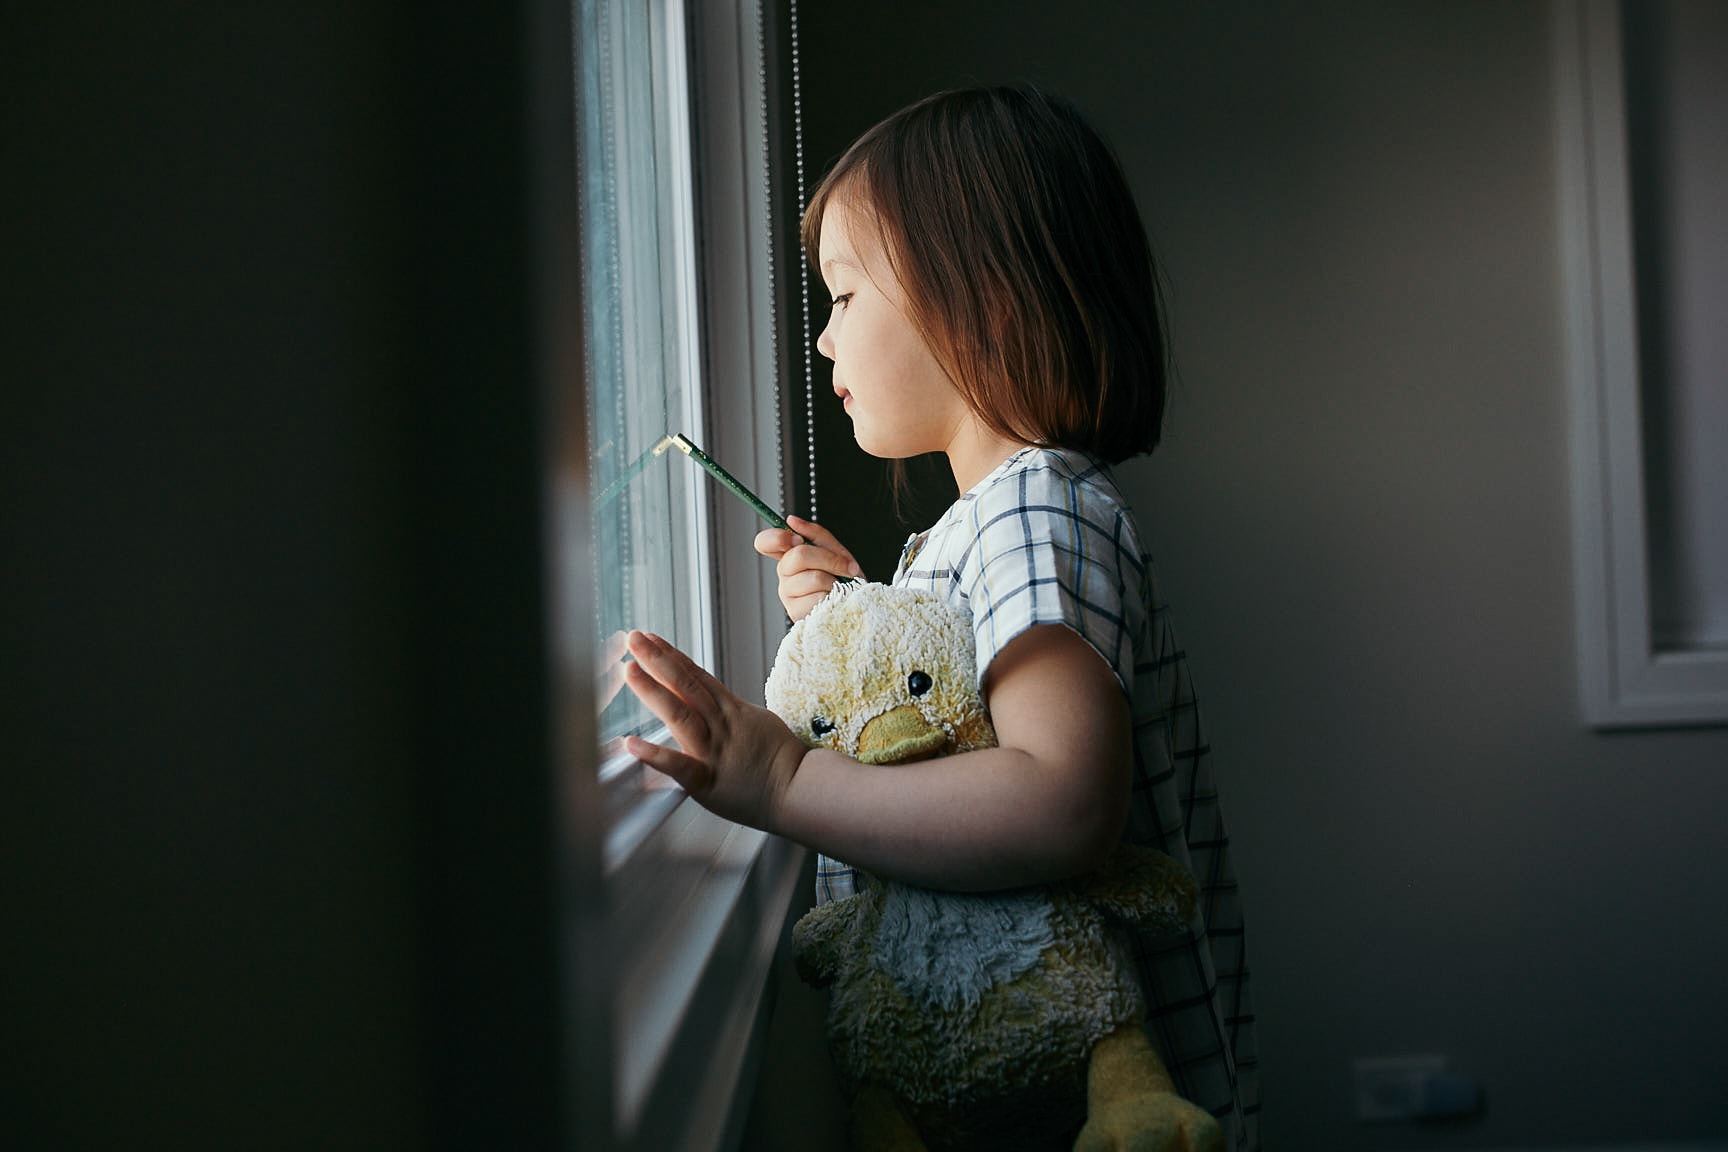 little girl looking out window holding a duck plushie